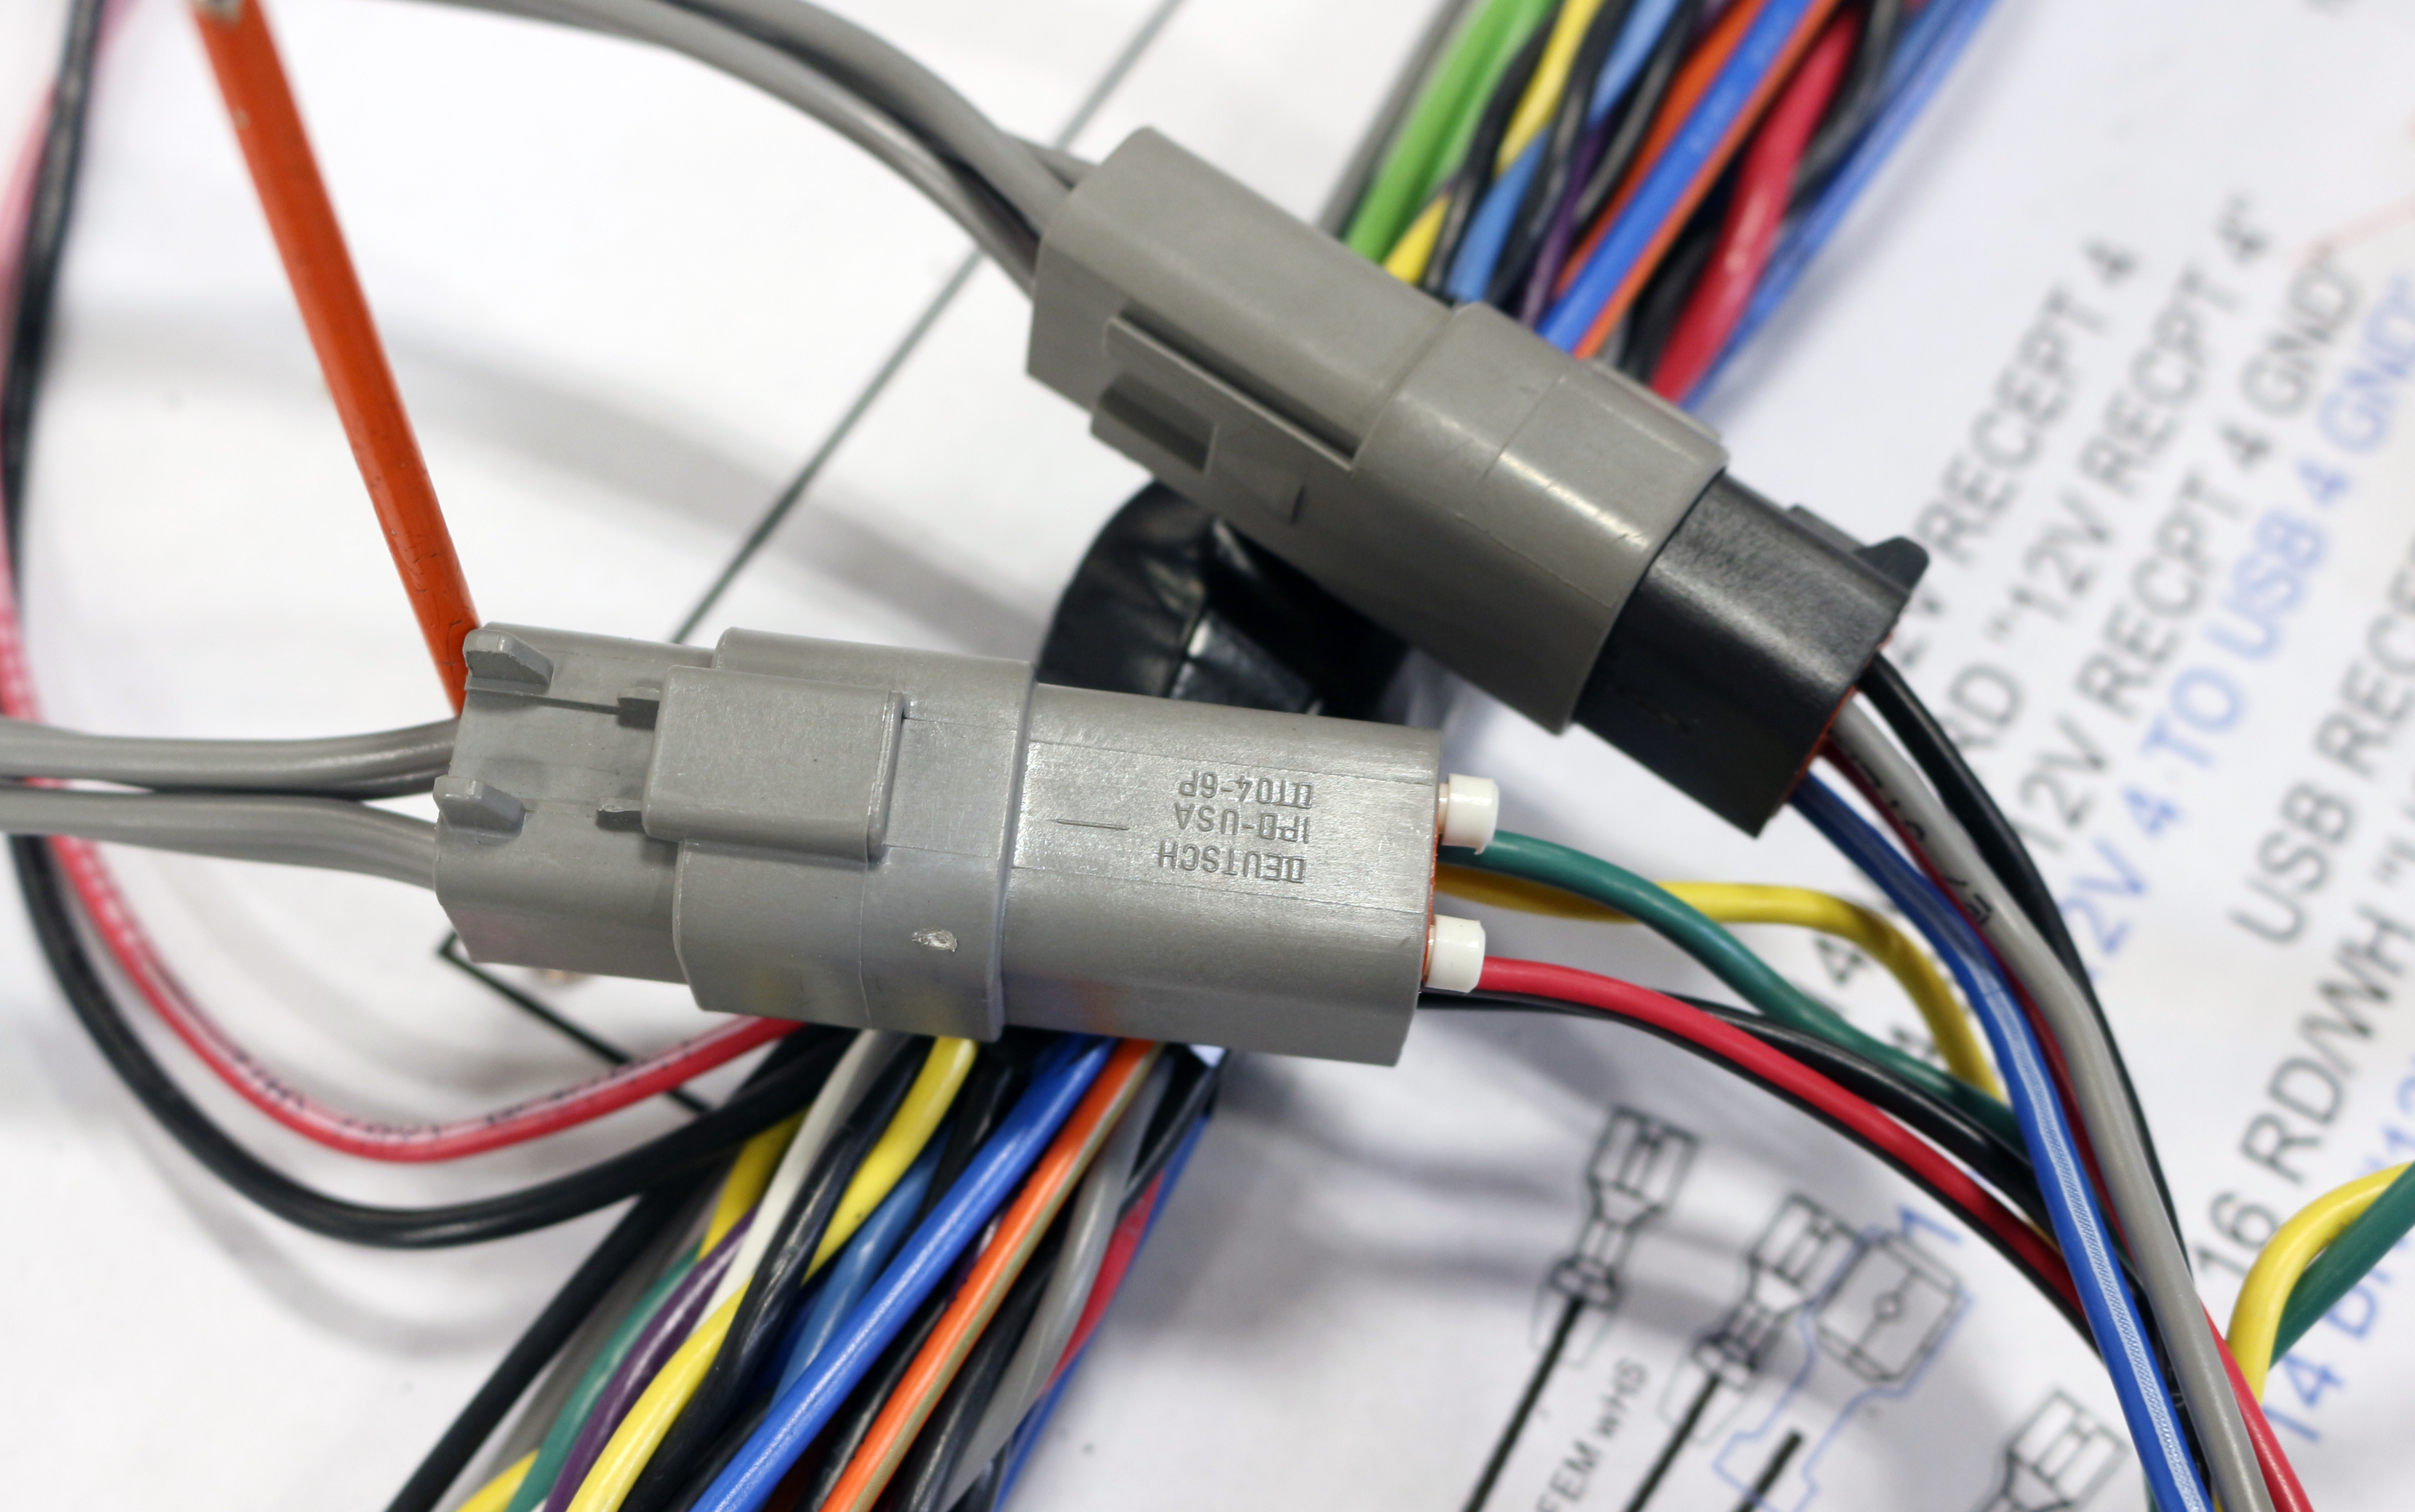 Sealed connectors are common in wiring harnesses